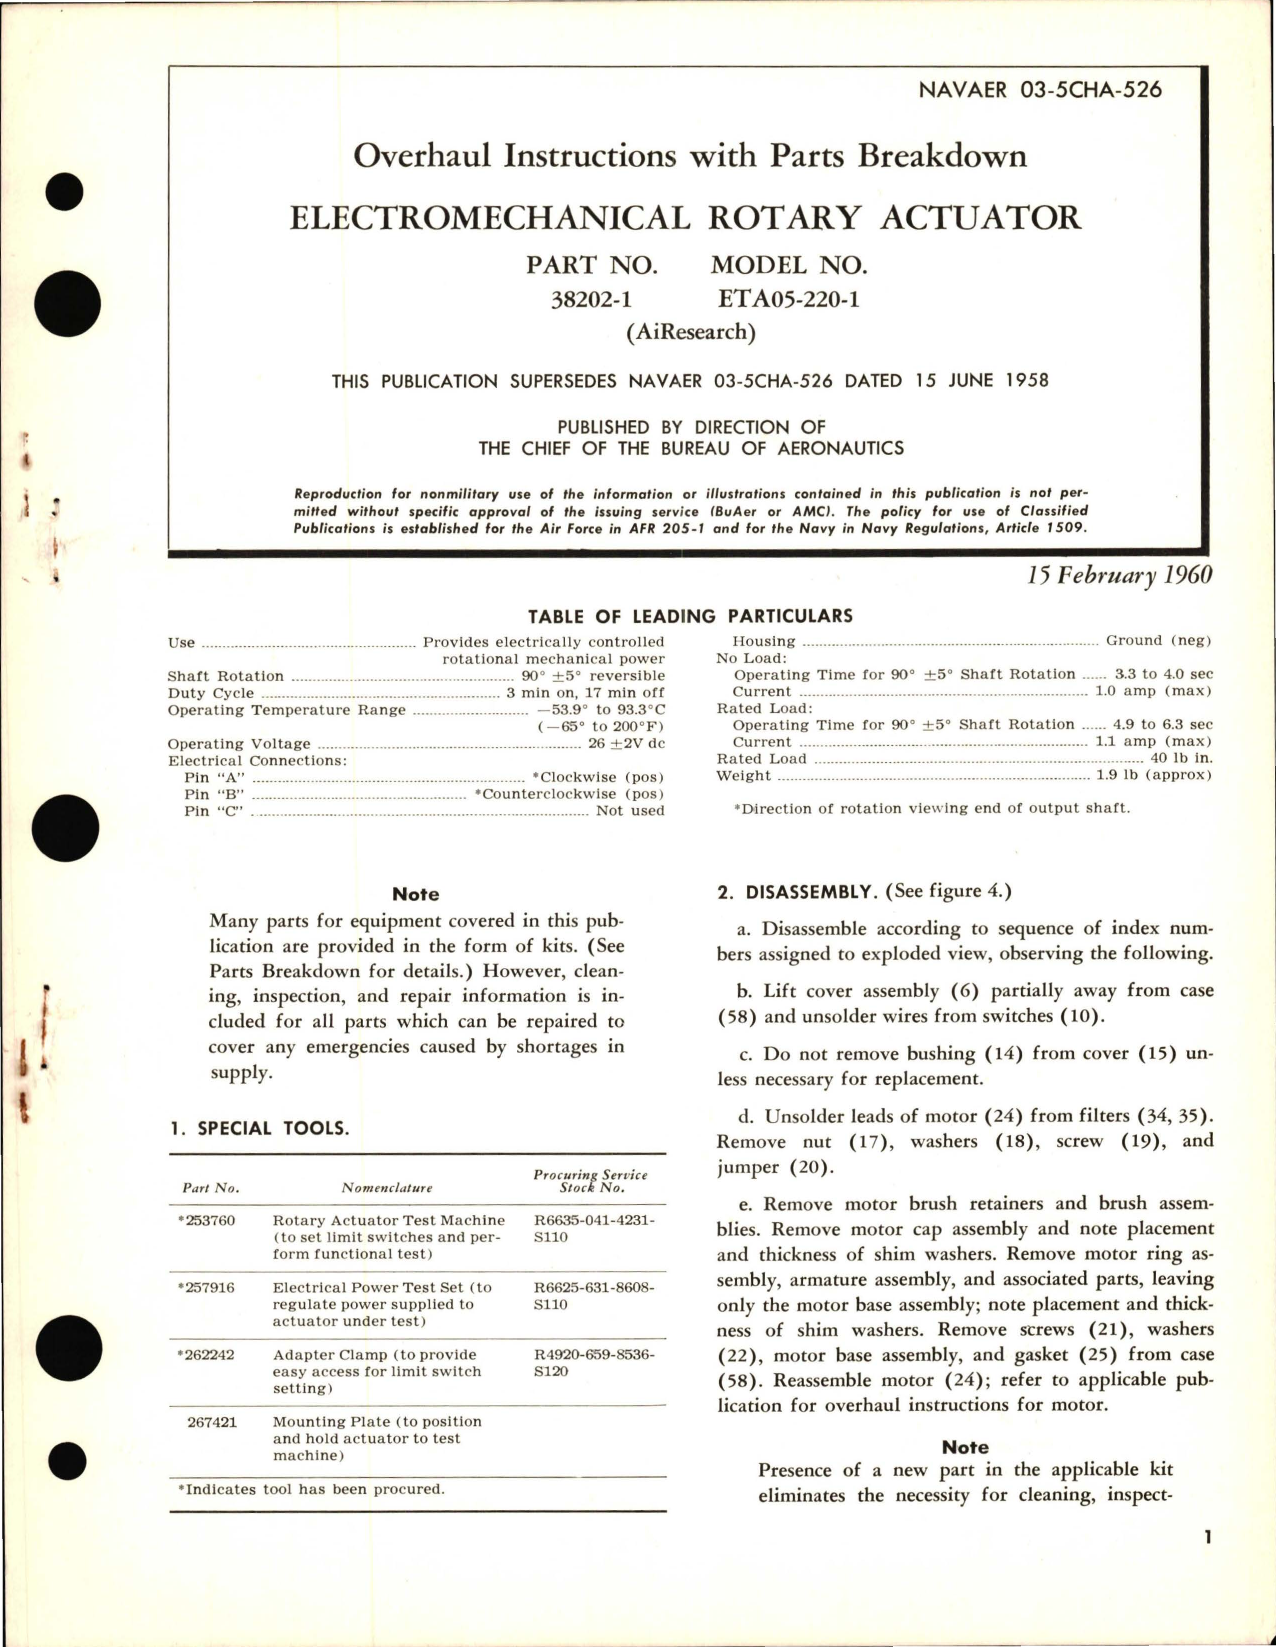 Sample page 1 from AirCorps Library document: Overhaul Instructions with Parts Breakdown for Electromechanical Rotary Actuator - Part 38202-1